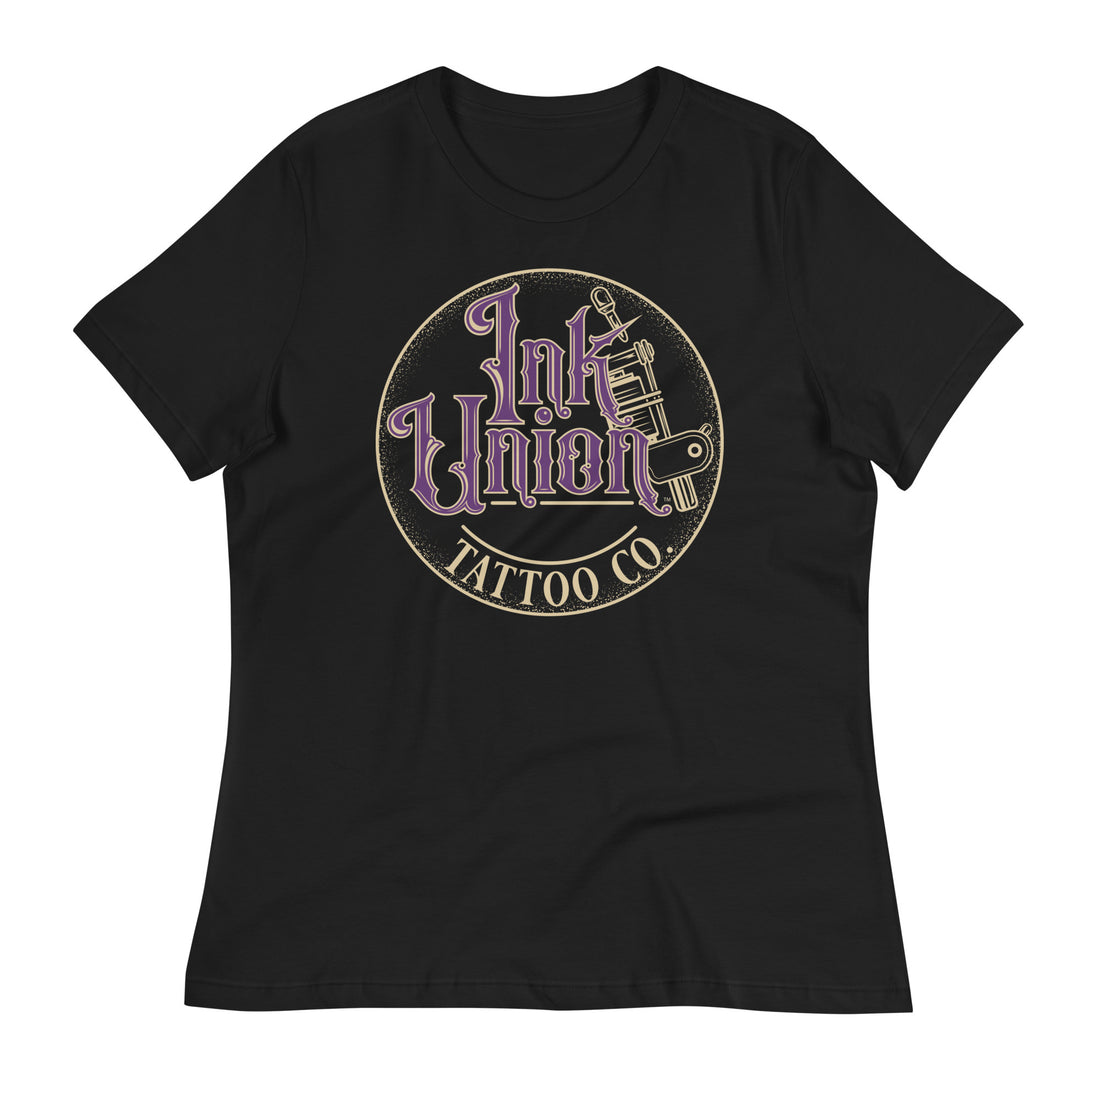 A black t-shirt with a gold circle containing fancy lettering in purple and gold that says Ink Union and a gold tattoo machine peeking out from behind on the right side.  There is a dot work gradient inside the circle, and the words Tattoo Co. in gold are at the bottom of the design.